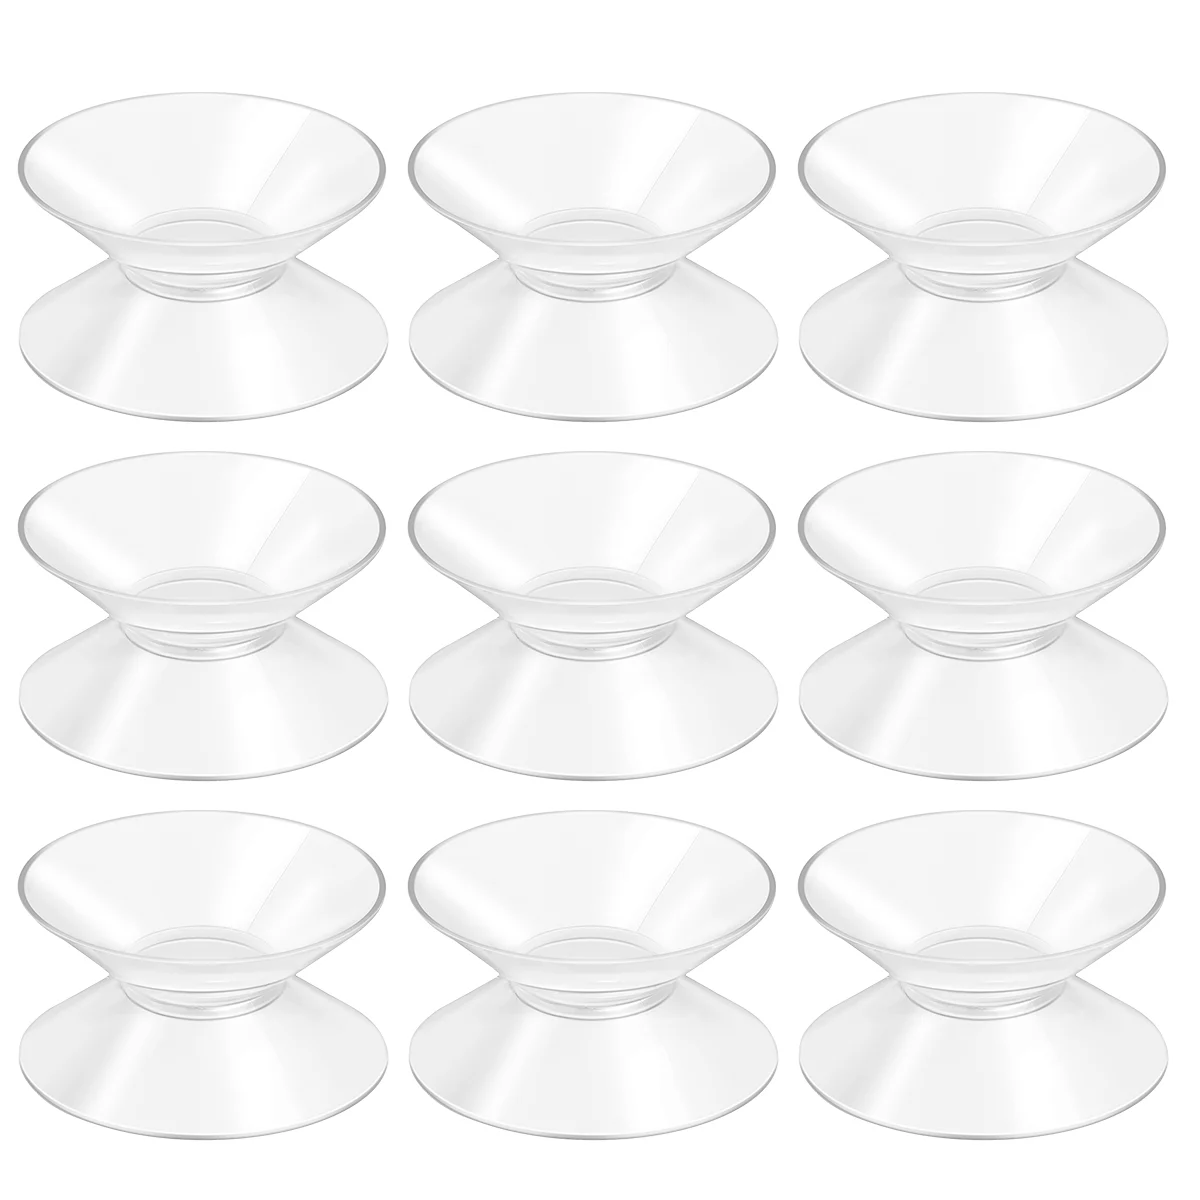 

BESTOMZ 10pcs 30mm Double Sided Suction Cups Sucker Pads for Glass Plastic